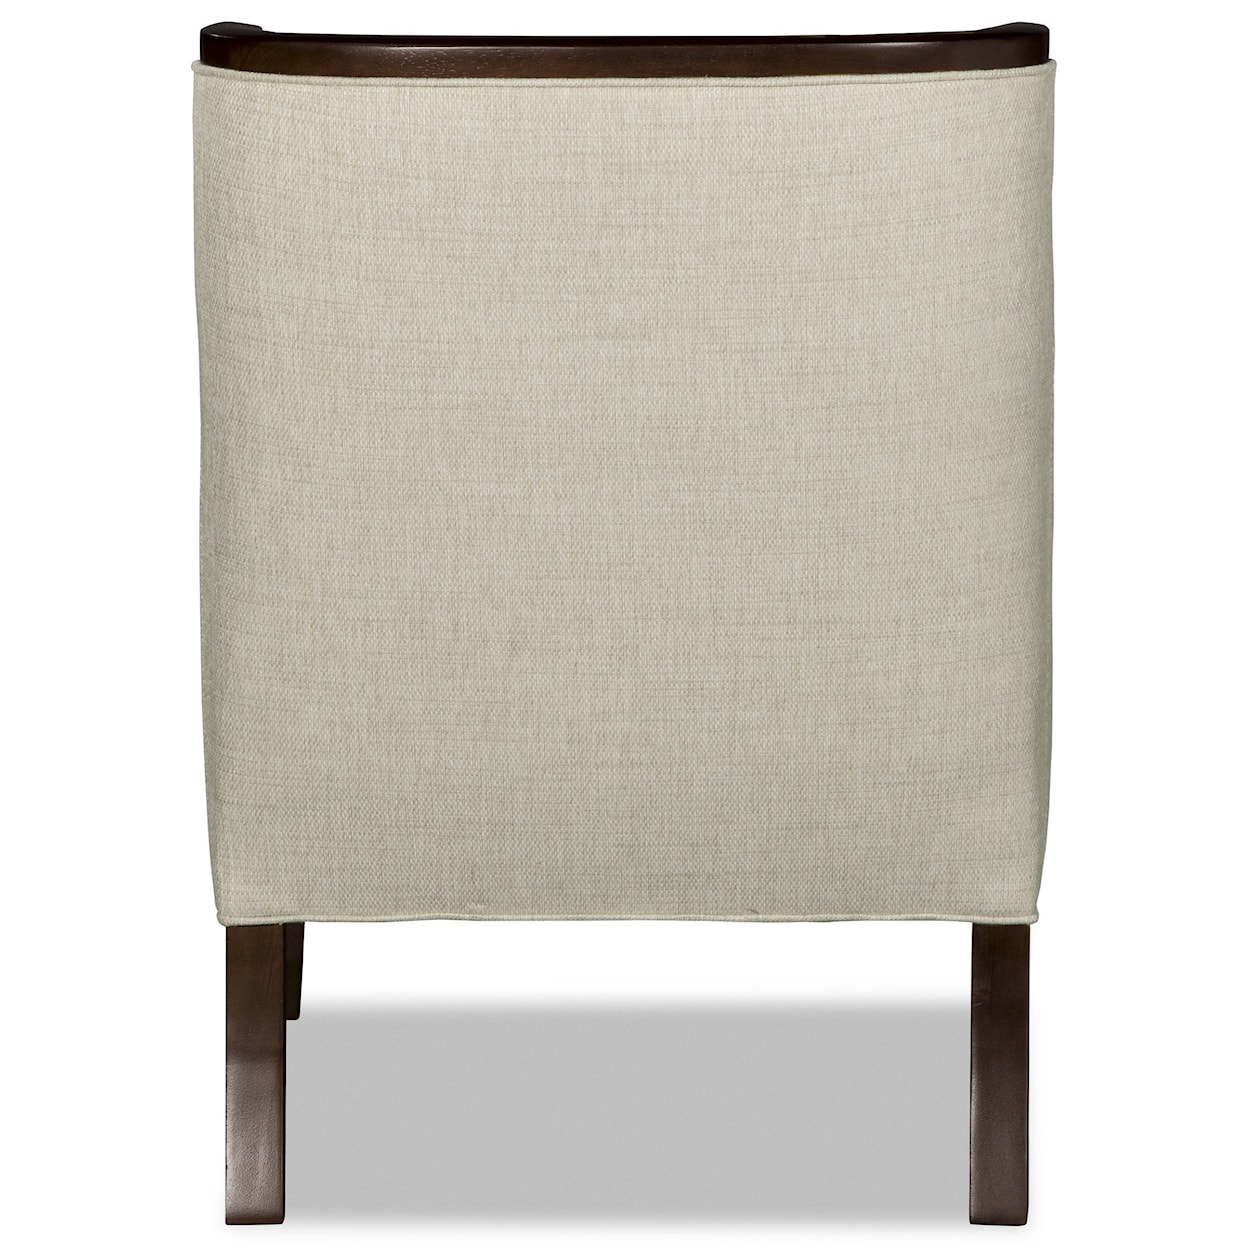 Craftmaster 001810BD Wood Accent Chair